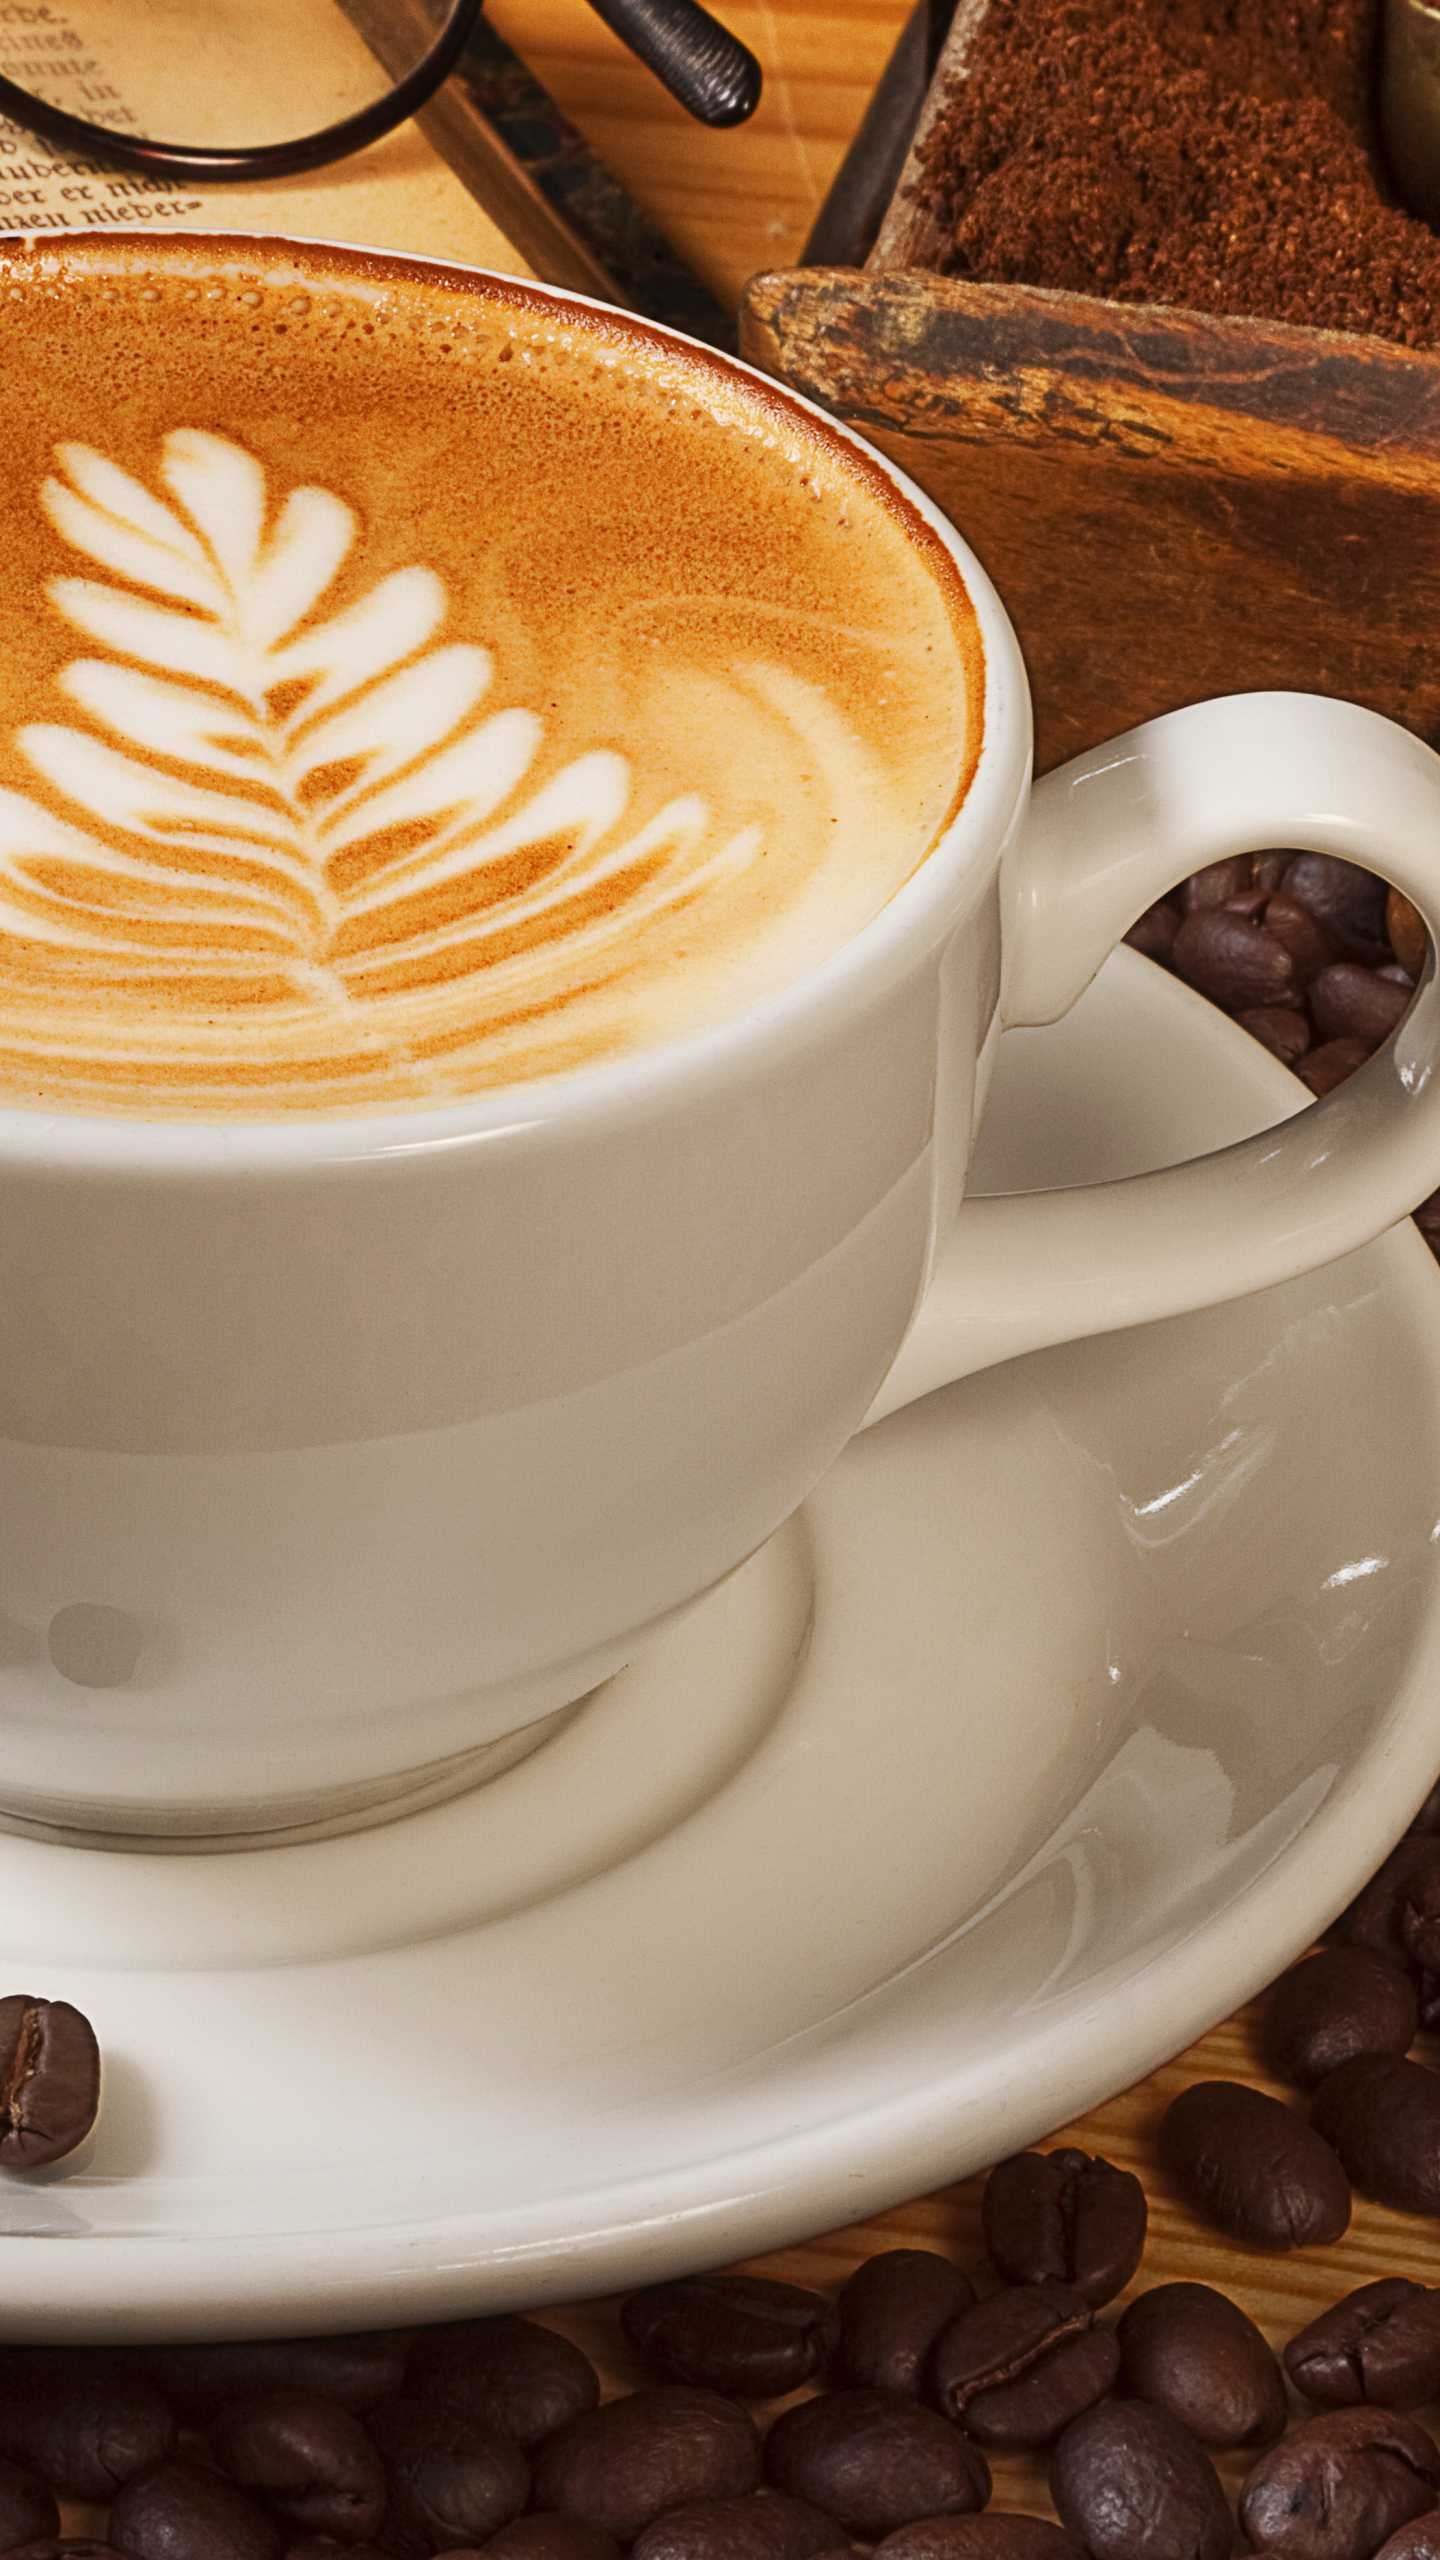 Coffee: Cappuccino, The surface topped with foamed milk. 1440x2560 HD Wallpaper.